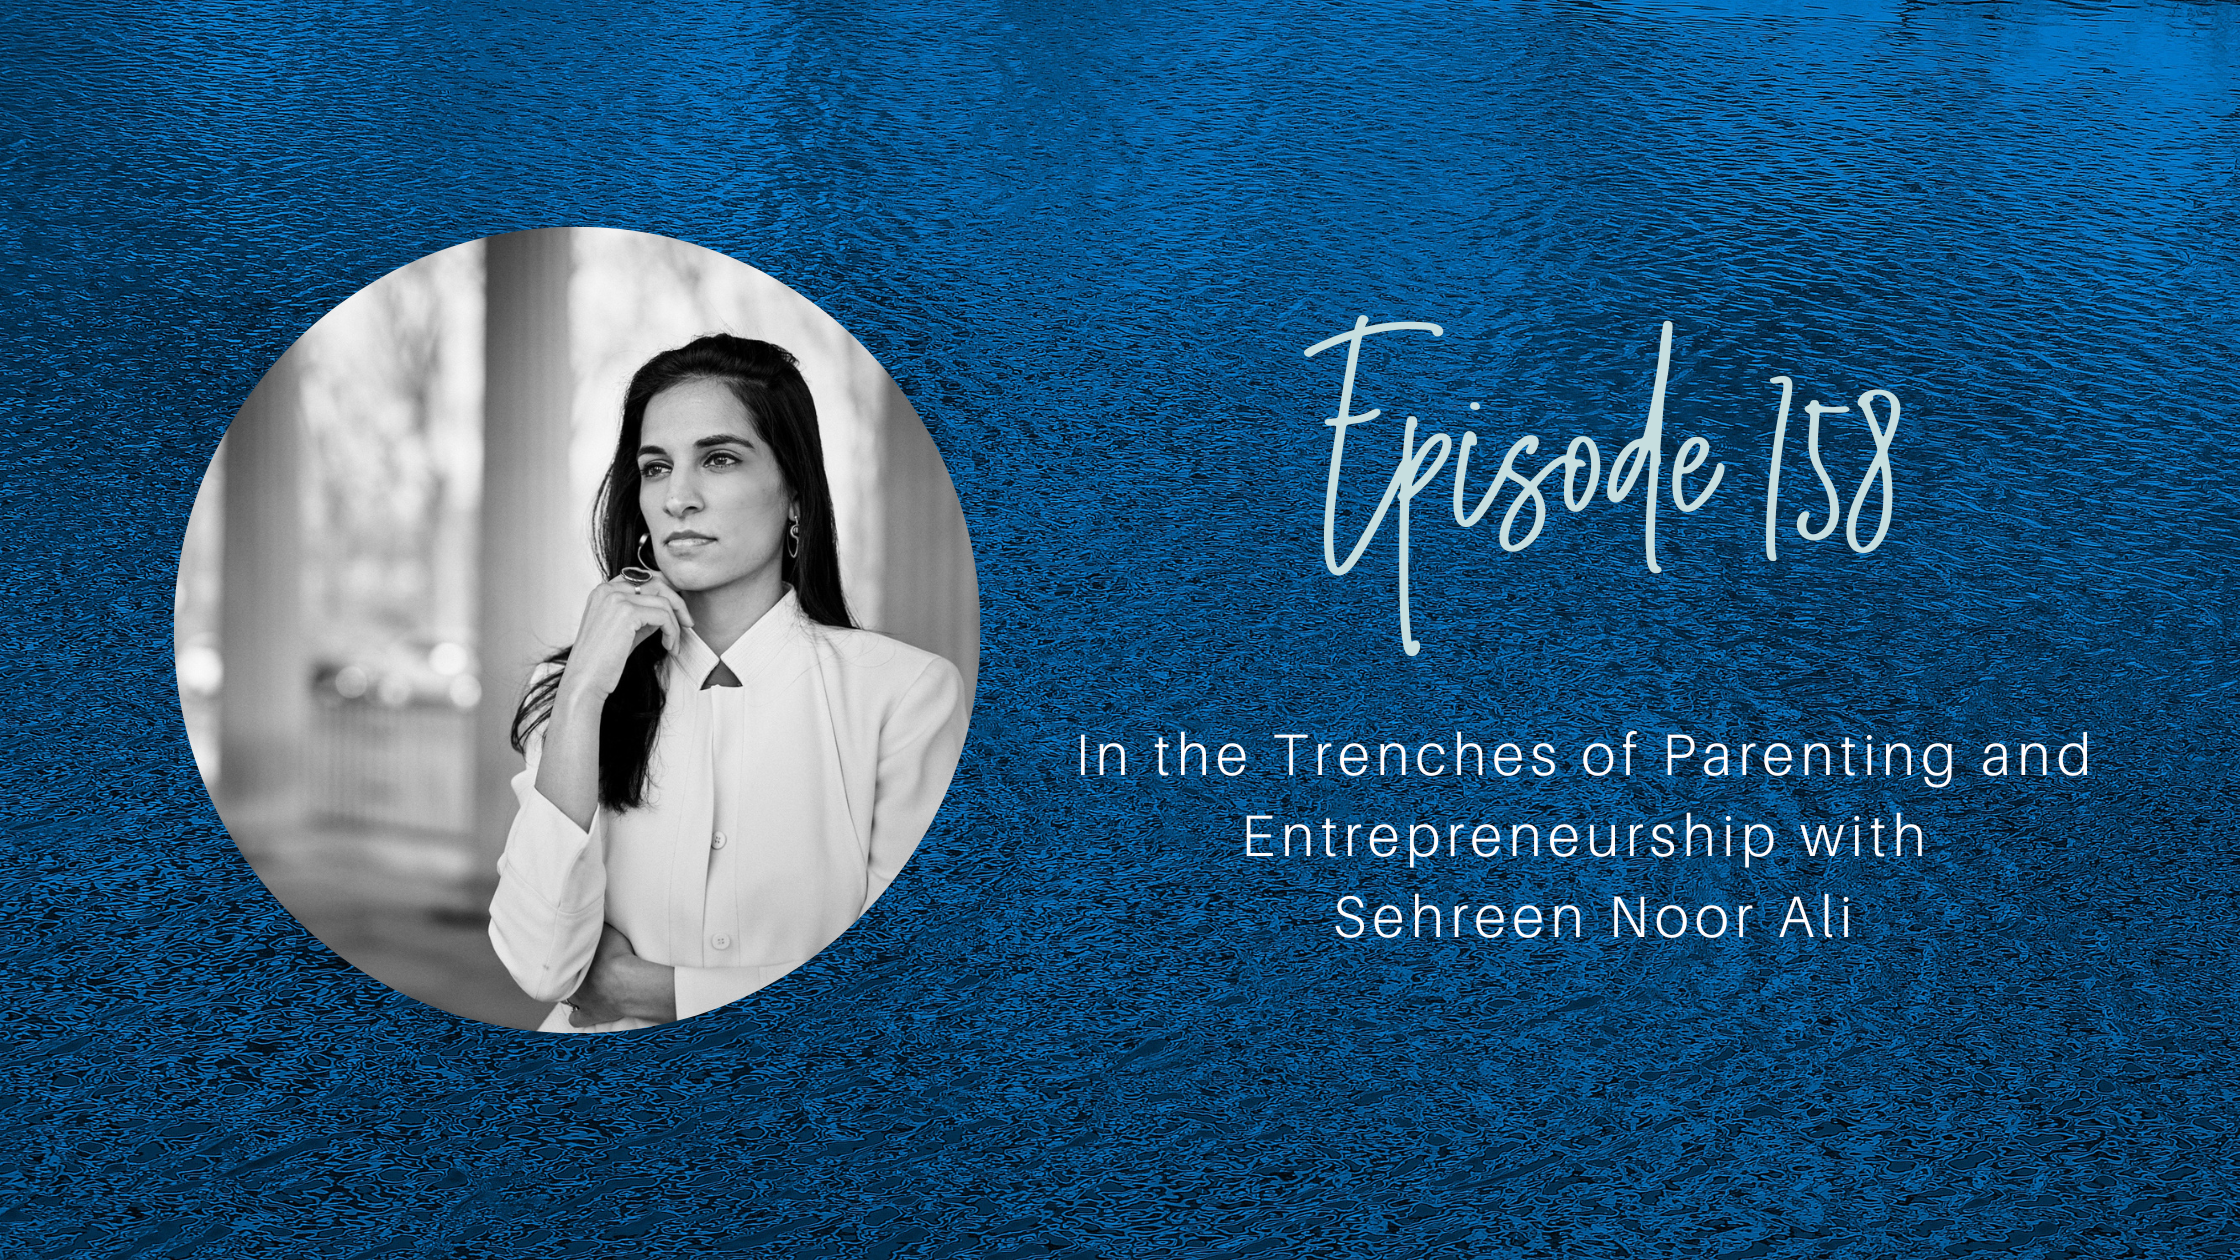 In the Trenches of Parenting and Entrepreneurship with Sehreen Noor Ali